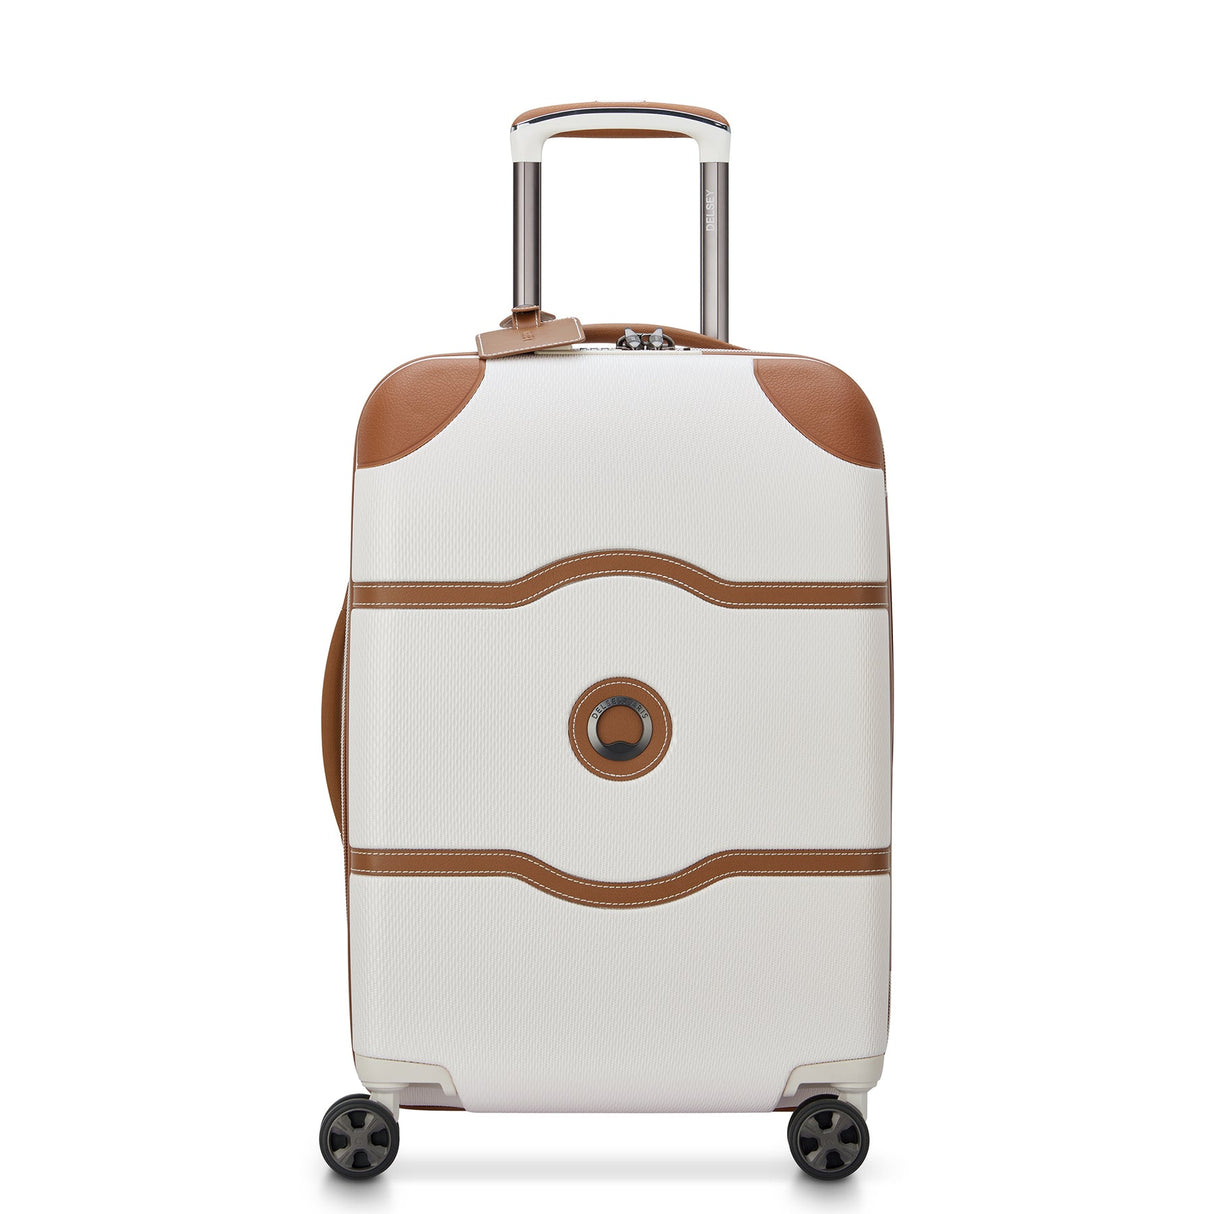 Delsey Chatelet Air 2.0 Carry-On Spinner , Angora , delsey-chatelet-air-2.0-40167680515-01_1800x1800_947380db-2666-4df9-a1a2-0a7884de32a8